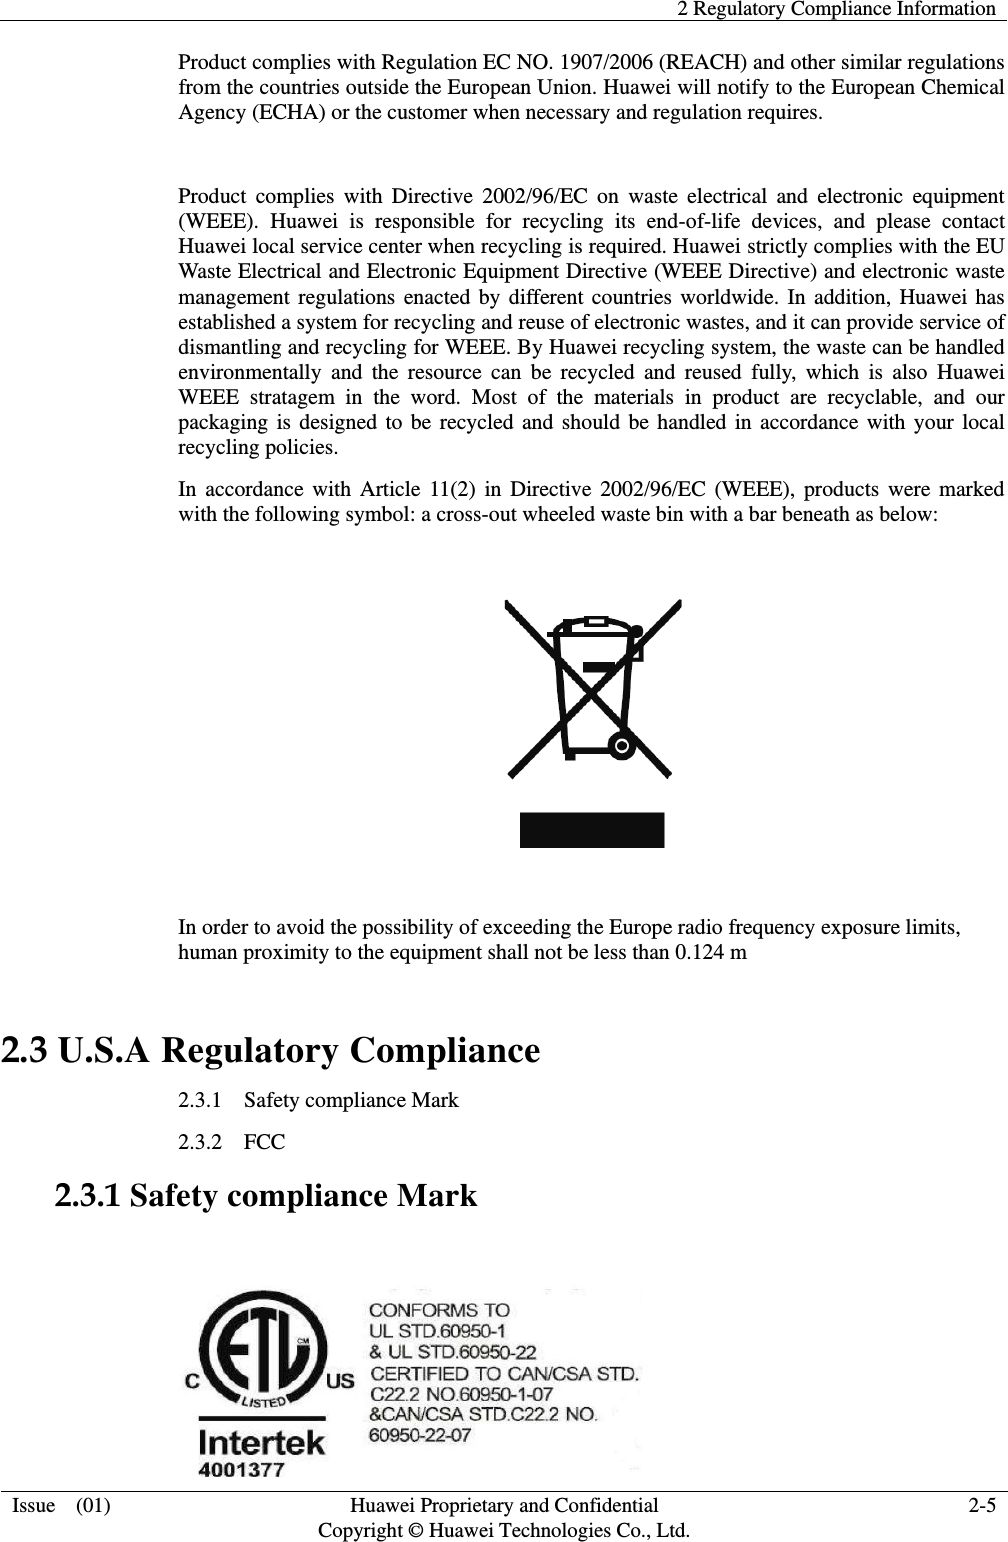   2 Regulatory Compliance Information  Issue    (01) Huawei Proprietary and Confidential                                     Copyright © Huawei Technologies Co., Ltd. 2-5  Product complies with Regulation EC NO. 1907/2006 (REACH) and other similar regulations from the countries outside the European Union. Huawei will notify to the European Chemical Agency (ECHA) or the customer when necessary and regulation requires.  Product  complies  with  Directive  2002/96/EC  on  waste  electrical  and  electronic  equipment (WEEE).  Huawei  is  responsible  for  recycling  its  end-of-life  devices,  and  please  contact Huawei local service center when recycling is required. Huawei strictly complies with the EU Waste Electrical and Electronic Equipment Directive (WEEE Directive) and electronic waste management regulations enacted by different countries worldwide. In addition, Huawei has established a system for recycling and reuse of electronic wastes, and it can provide service of dismantling and recycling for WEEE. By Huawei recycling system, the waste can be handled environmentally  and  the  resource  can  be  recycled  and  reused  fully,  which  is  also  Huawei WEEE  stratagem  in  the  word.  Most  of  the  materials  in  product  are  recyclable,  and  our packaging is designed to be recycled and should be handled in accordance with your local recycling policies.   In accordance with  Article 11(2)  in  Directive 2002/96/EC  (WEEE),  products  were marked with the following symbol: a cross-out wheeled waste bin with a bar beneath as below:    In order to avoid the possibility of exceeding the Europe radio frequency exposure limits, human proximity to the equipment shall not be less than 0.124 m 2.3 U.S.A Regulatory Compliance 2.3.1    Safety compliance Mark   2.3.2  FCC   2.3.1 Safety compliance Mark       